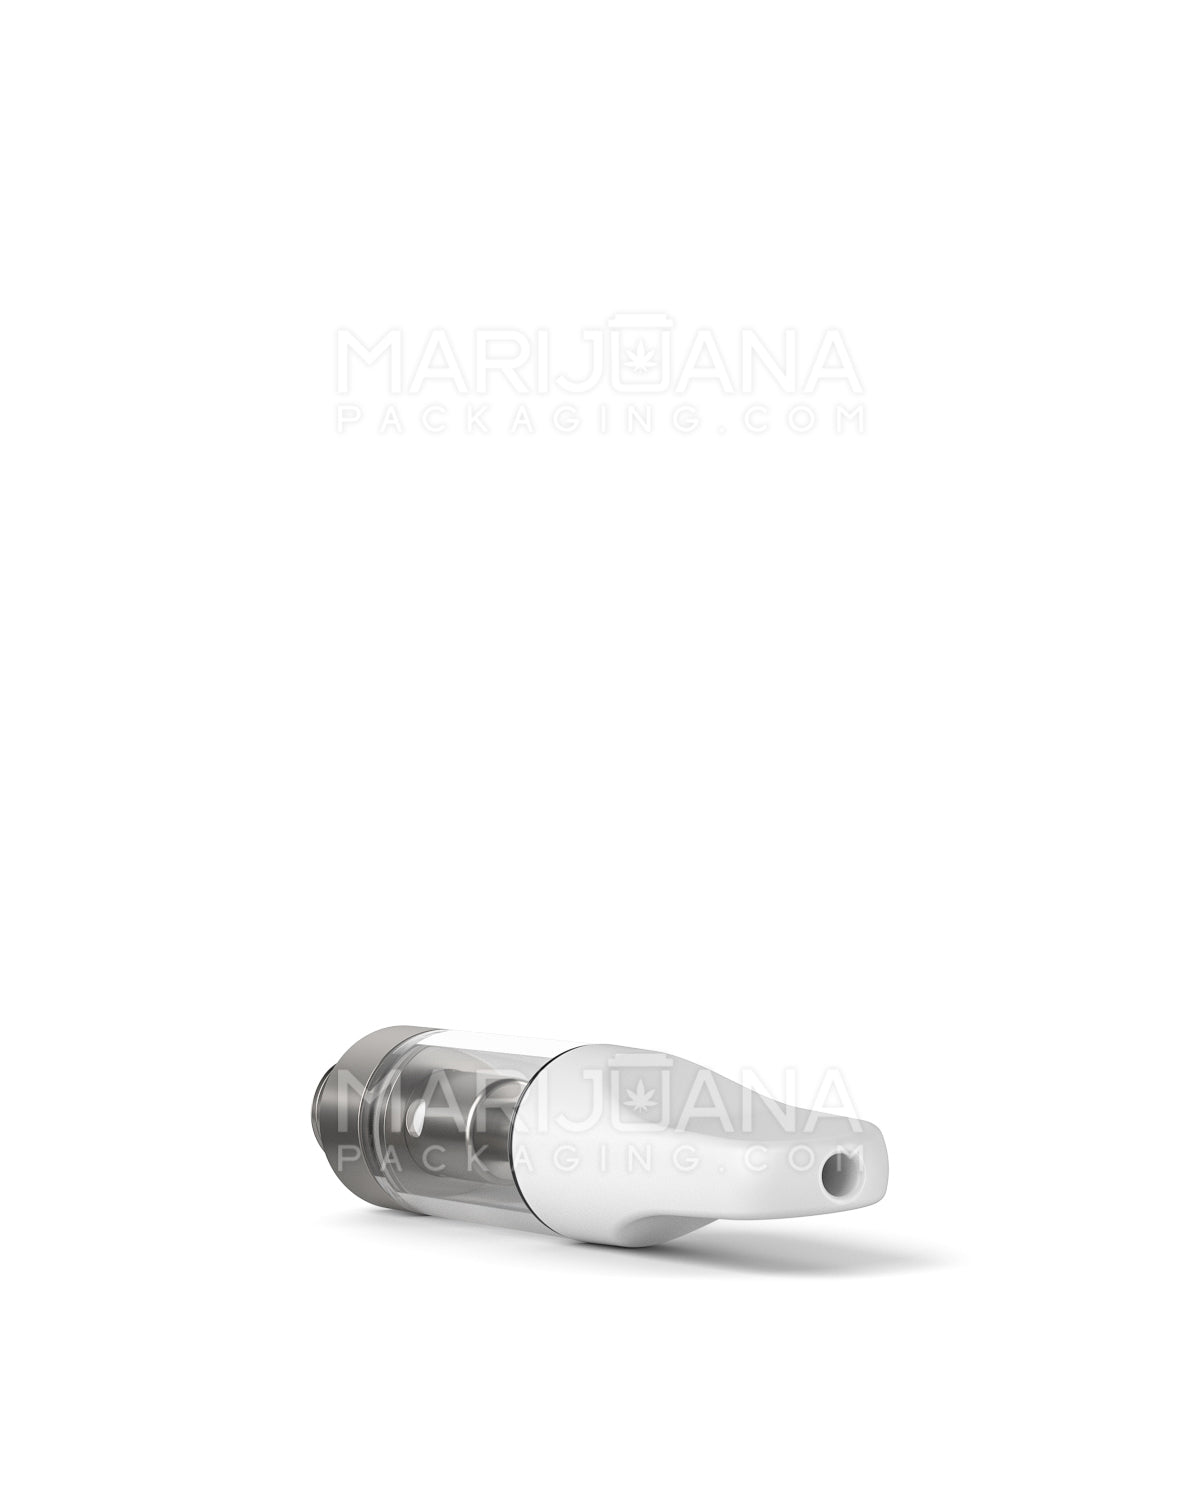 CCELL | Liquid6 Reactor Glass Vape Cartridge with White Plastic Mouthpiece | 0.5mL - Screw On - 100 Count - 6